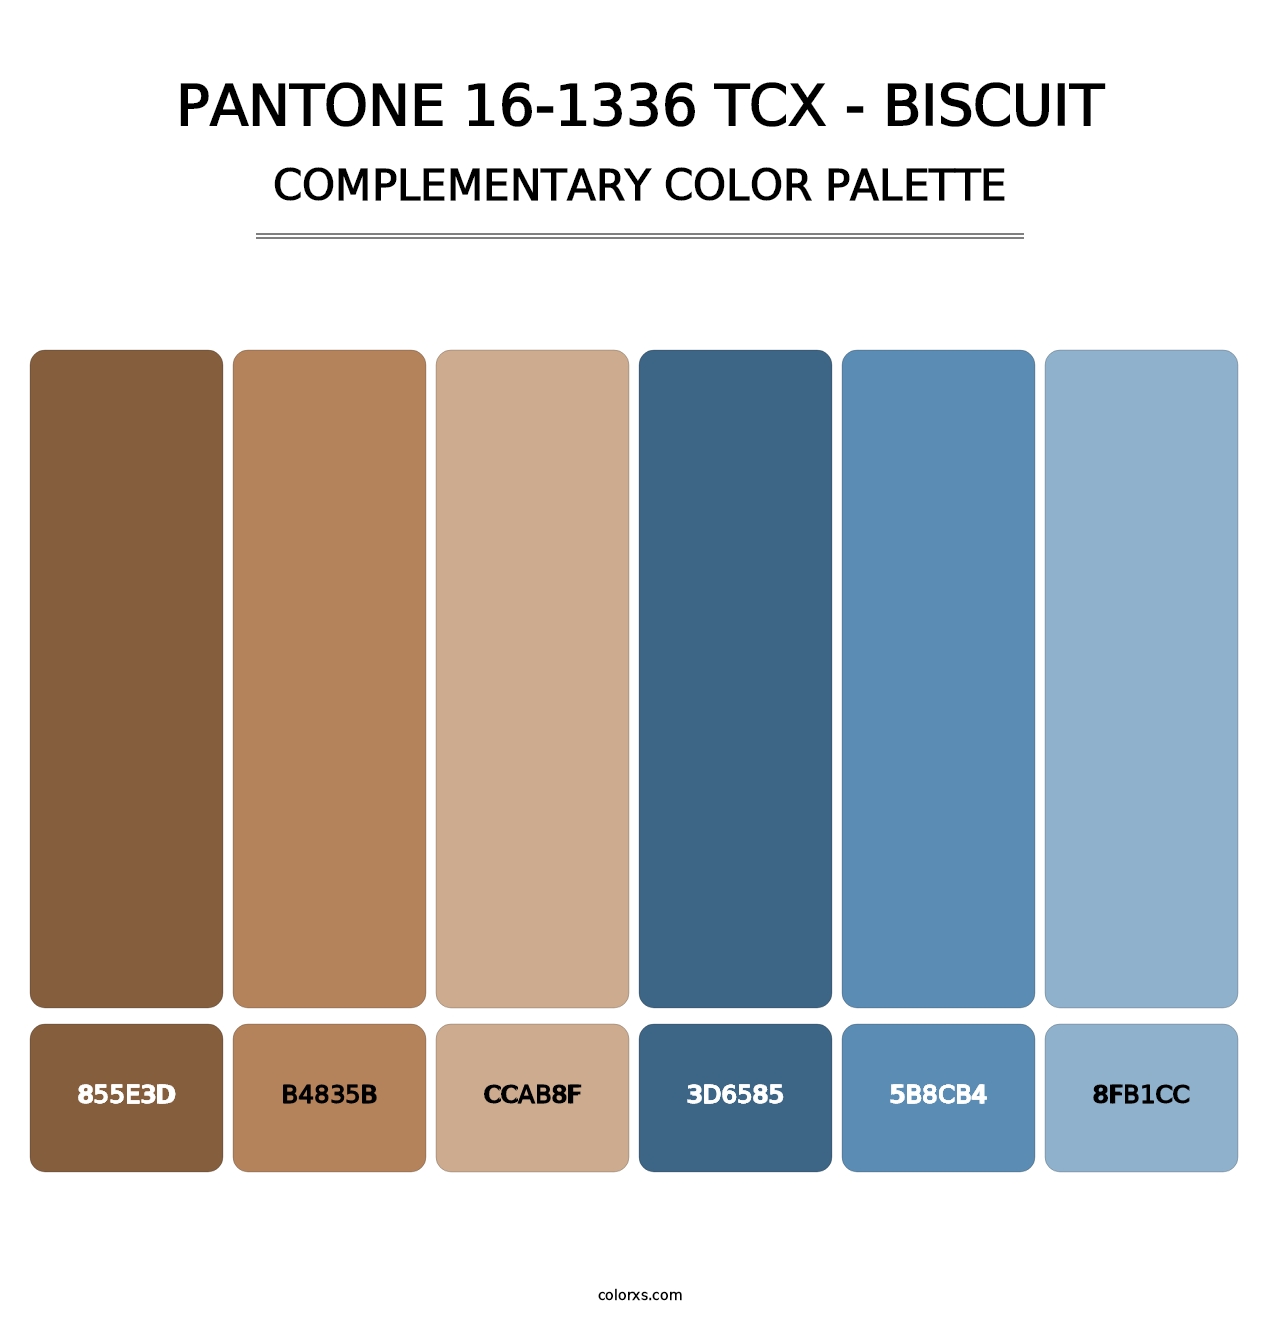 PANTONE 16-1336 TCX - Biscuit - Complementary Color Palette